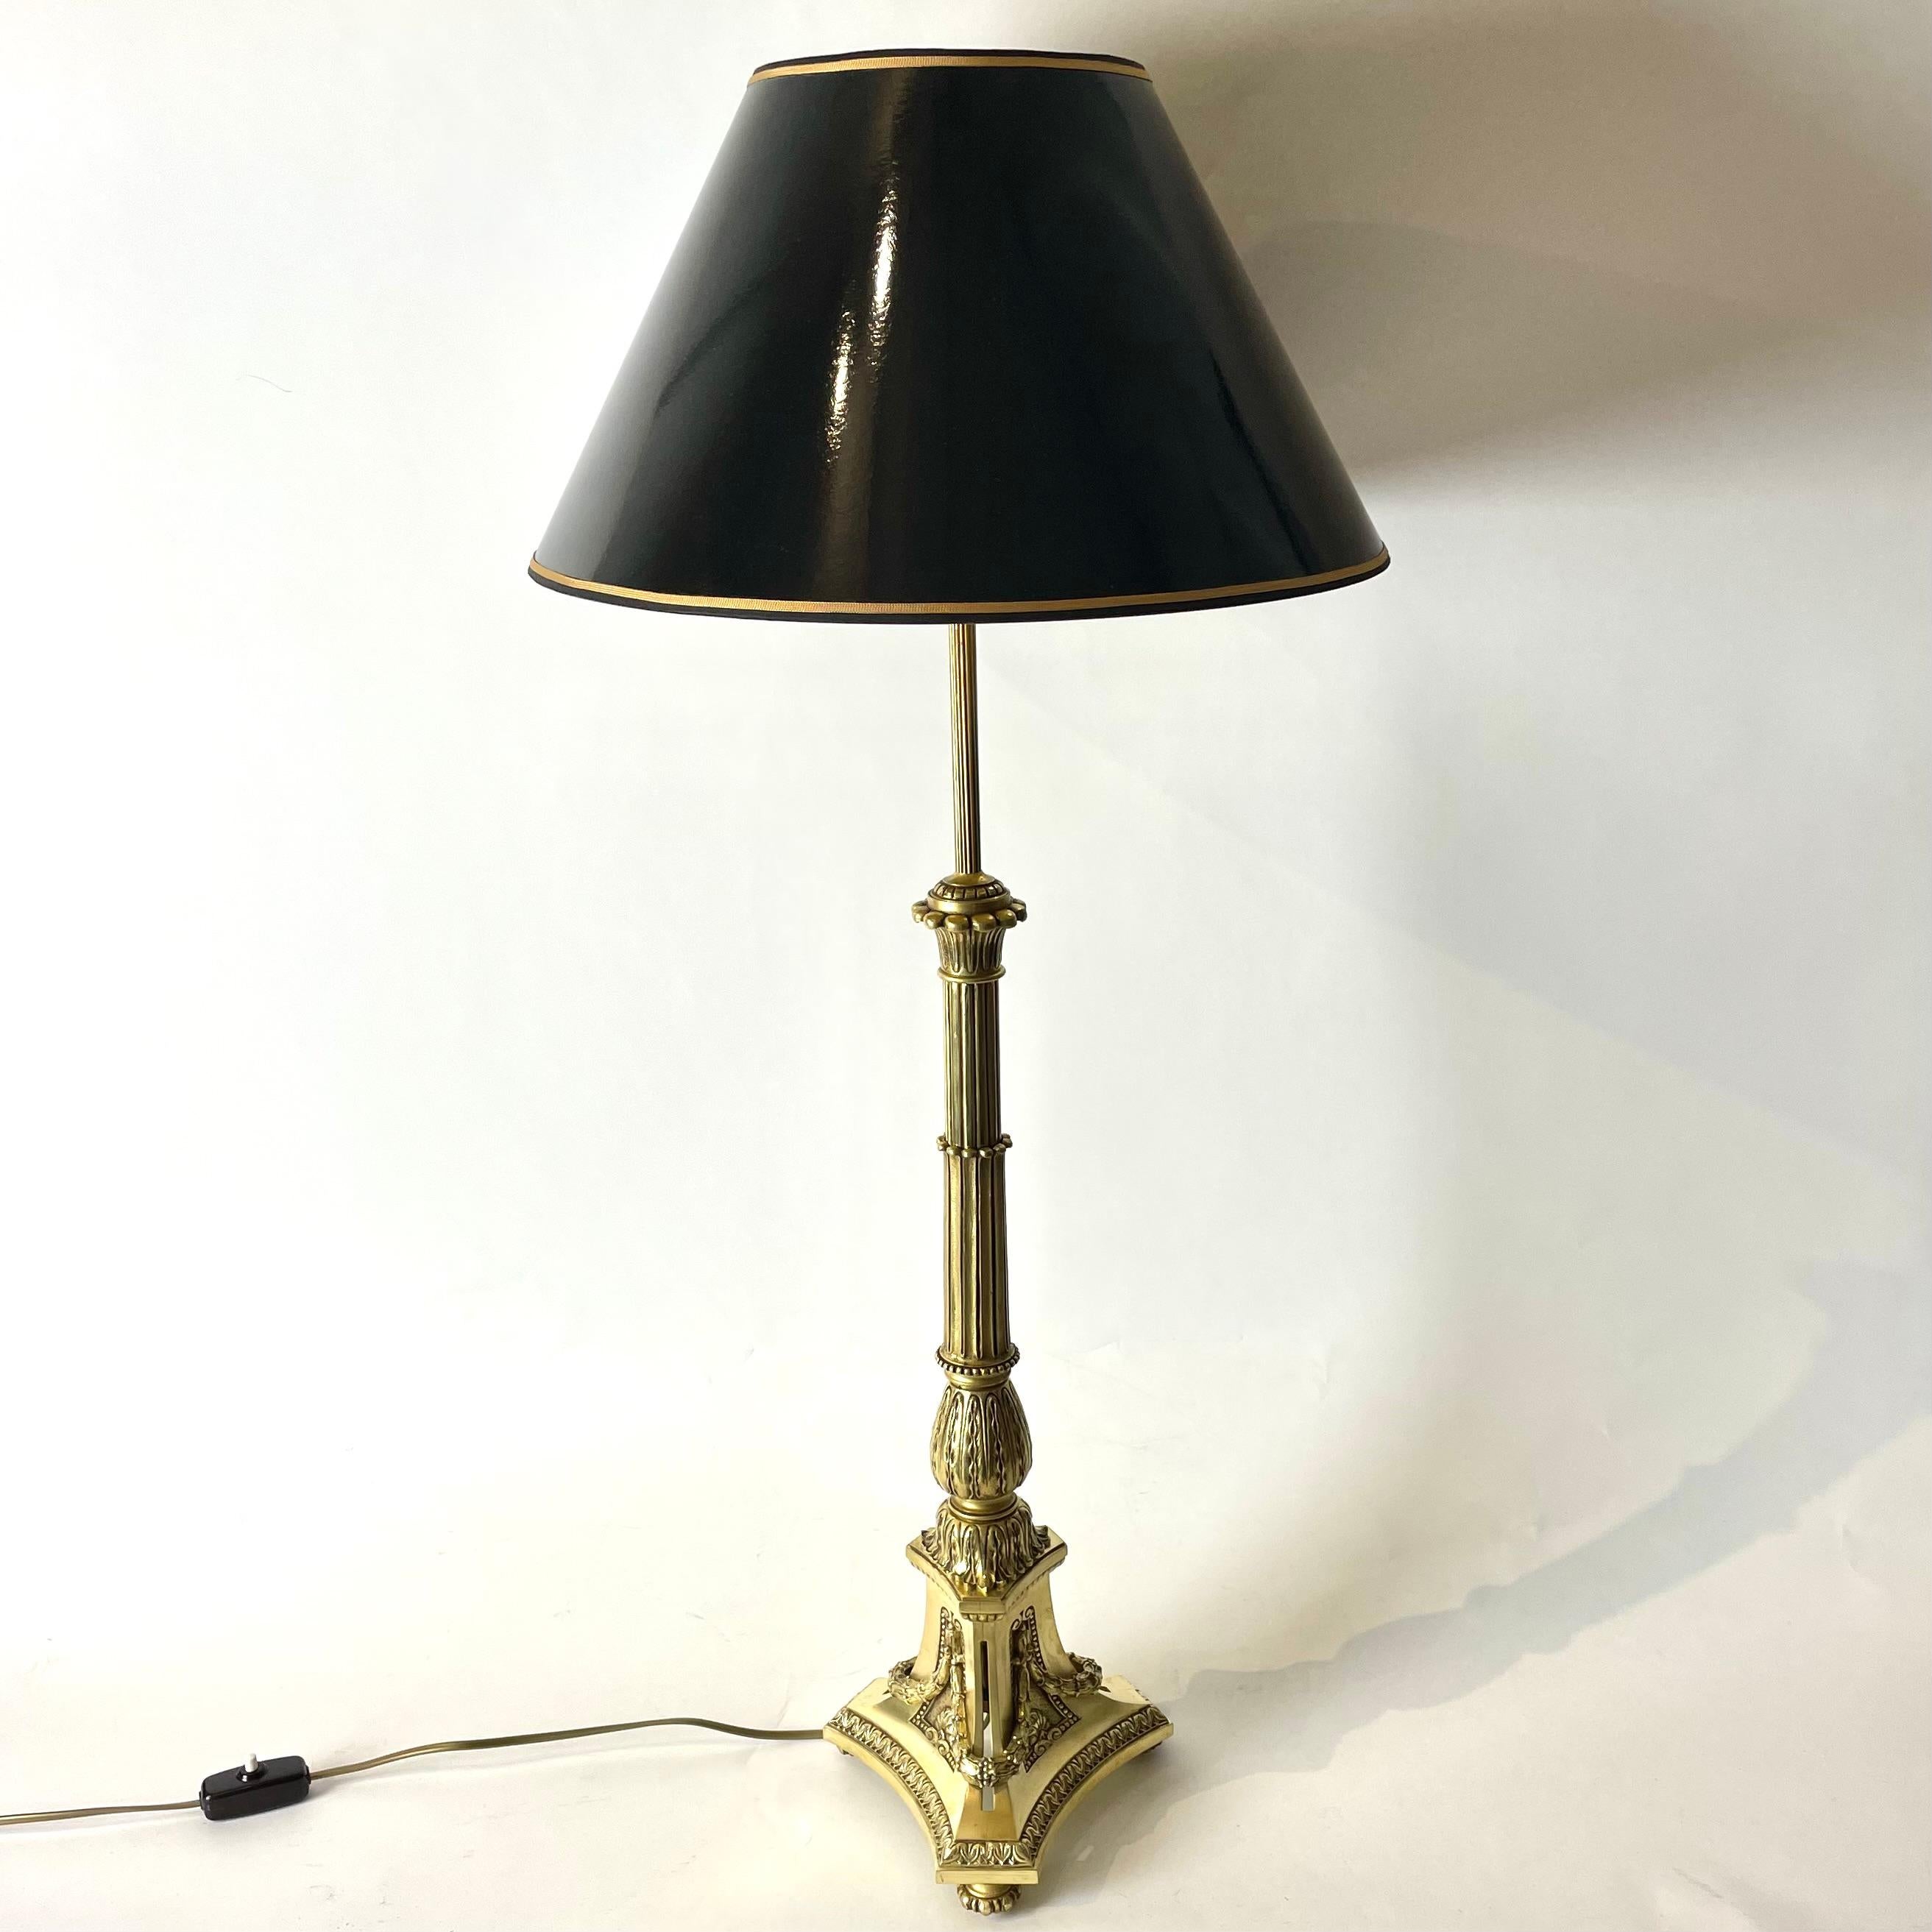 An Elegant and Large Table Lamp in the style of Louis XVI, Gilt Bronze Acanthus Ornamentation

This table lamp features an interpretation of the classical column-based table lamp, consisting of natural and leaf ornaments. It consists of a triangular